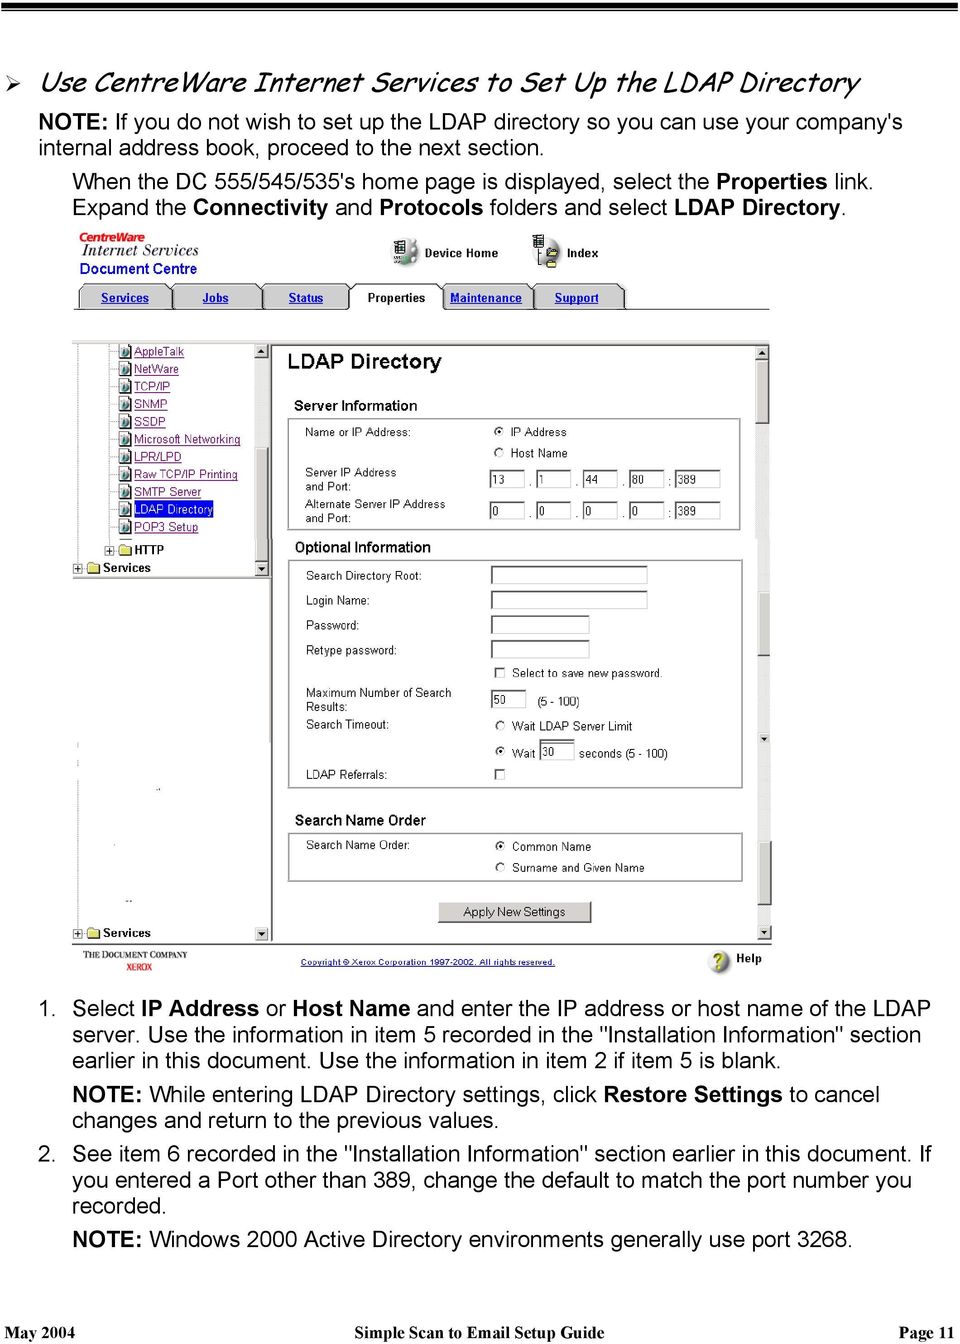 Select IP Address or Host Name and enter the IP address or host name of the LDAP server. Use the information in item 5 recorded in the "Installation Information" section earlier in this document.